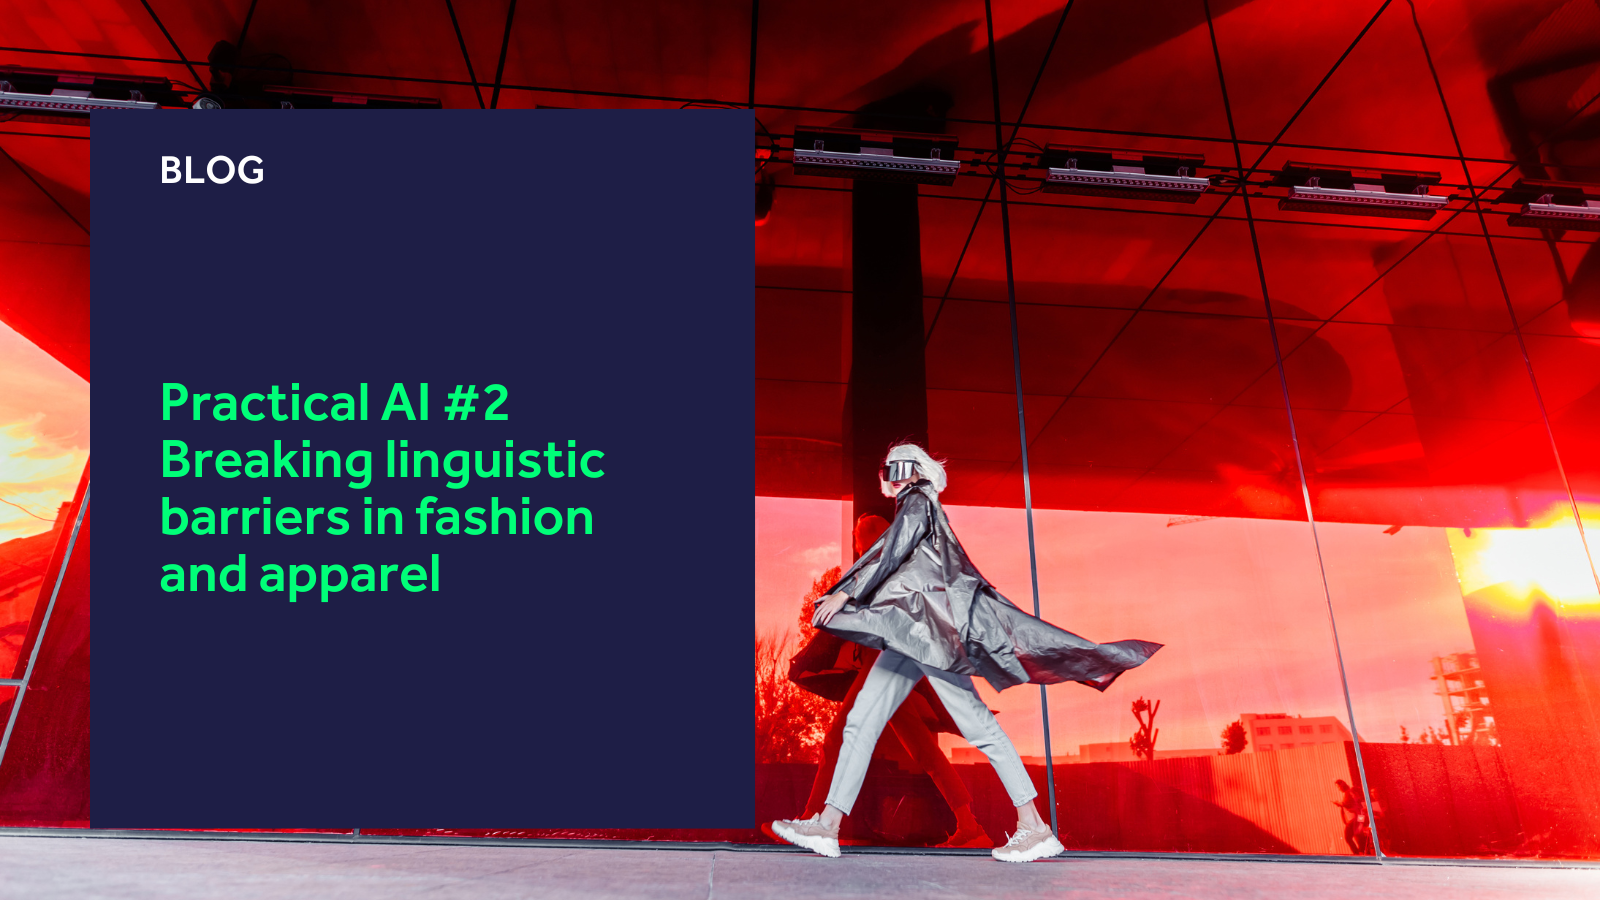 Practical AI #2 Breaking linguistic barriers in fashion and apparel blog header